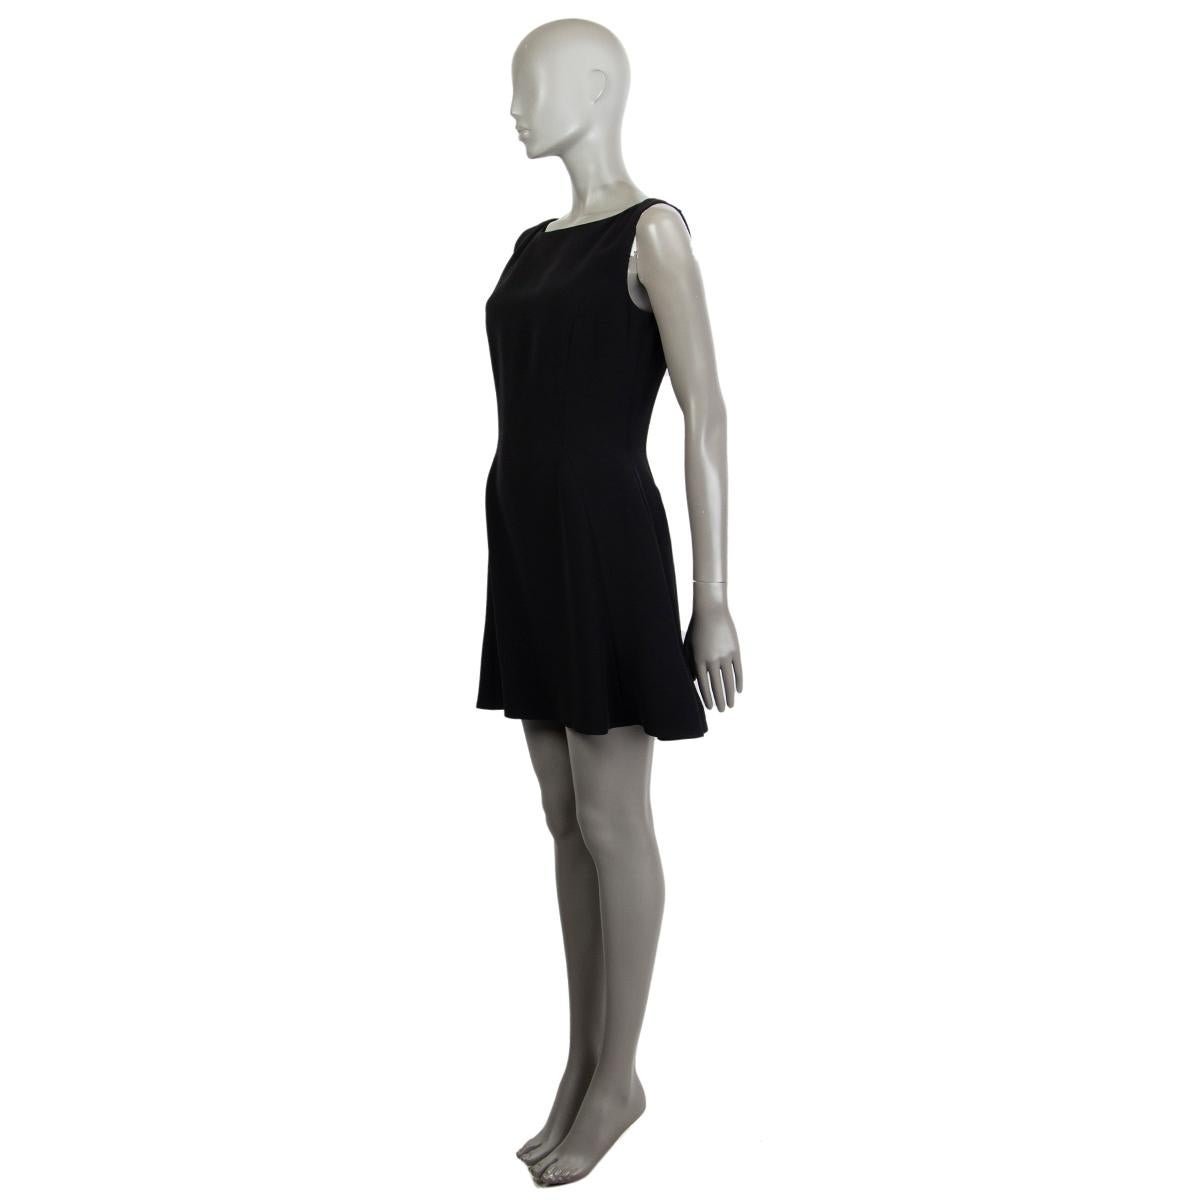 Christian Dior sleeveless mini dress in black silk (100%) with a round neck. Closes on the back with a concealed zipper. Lined in silk (100%). Has been worn and is in excellent condition.  

Tag Size 38
Size S
Shoulder Width 36cm (14in)
Bust From